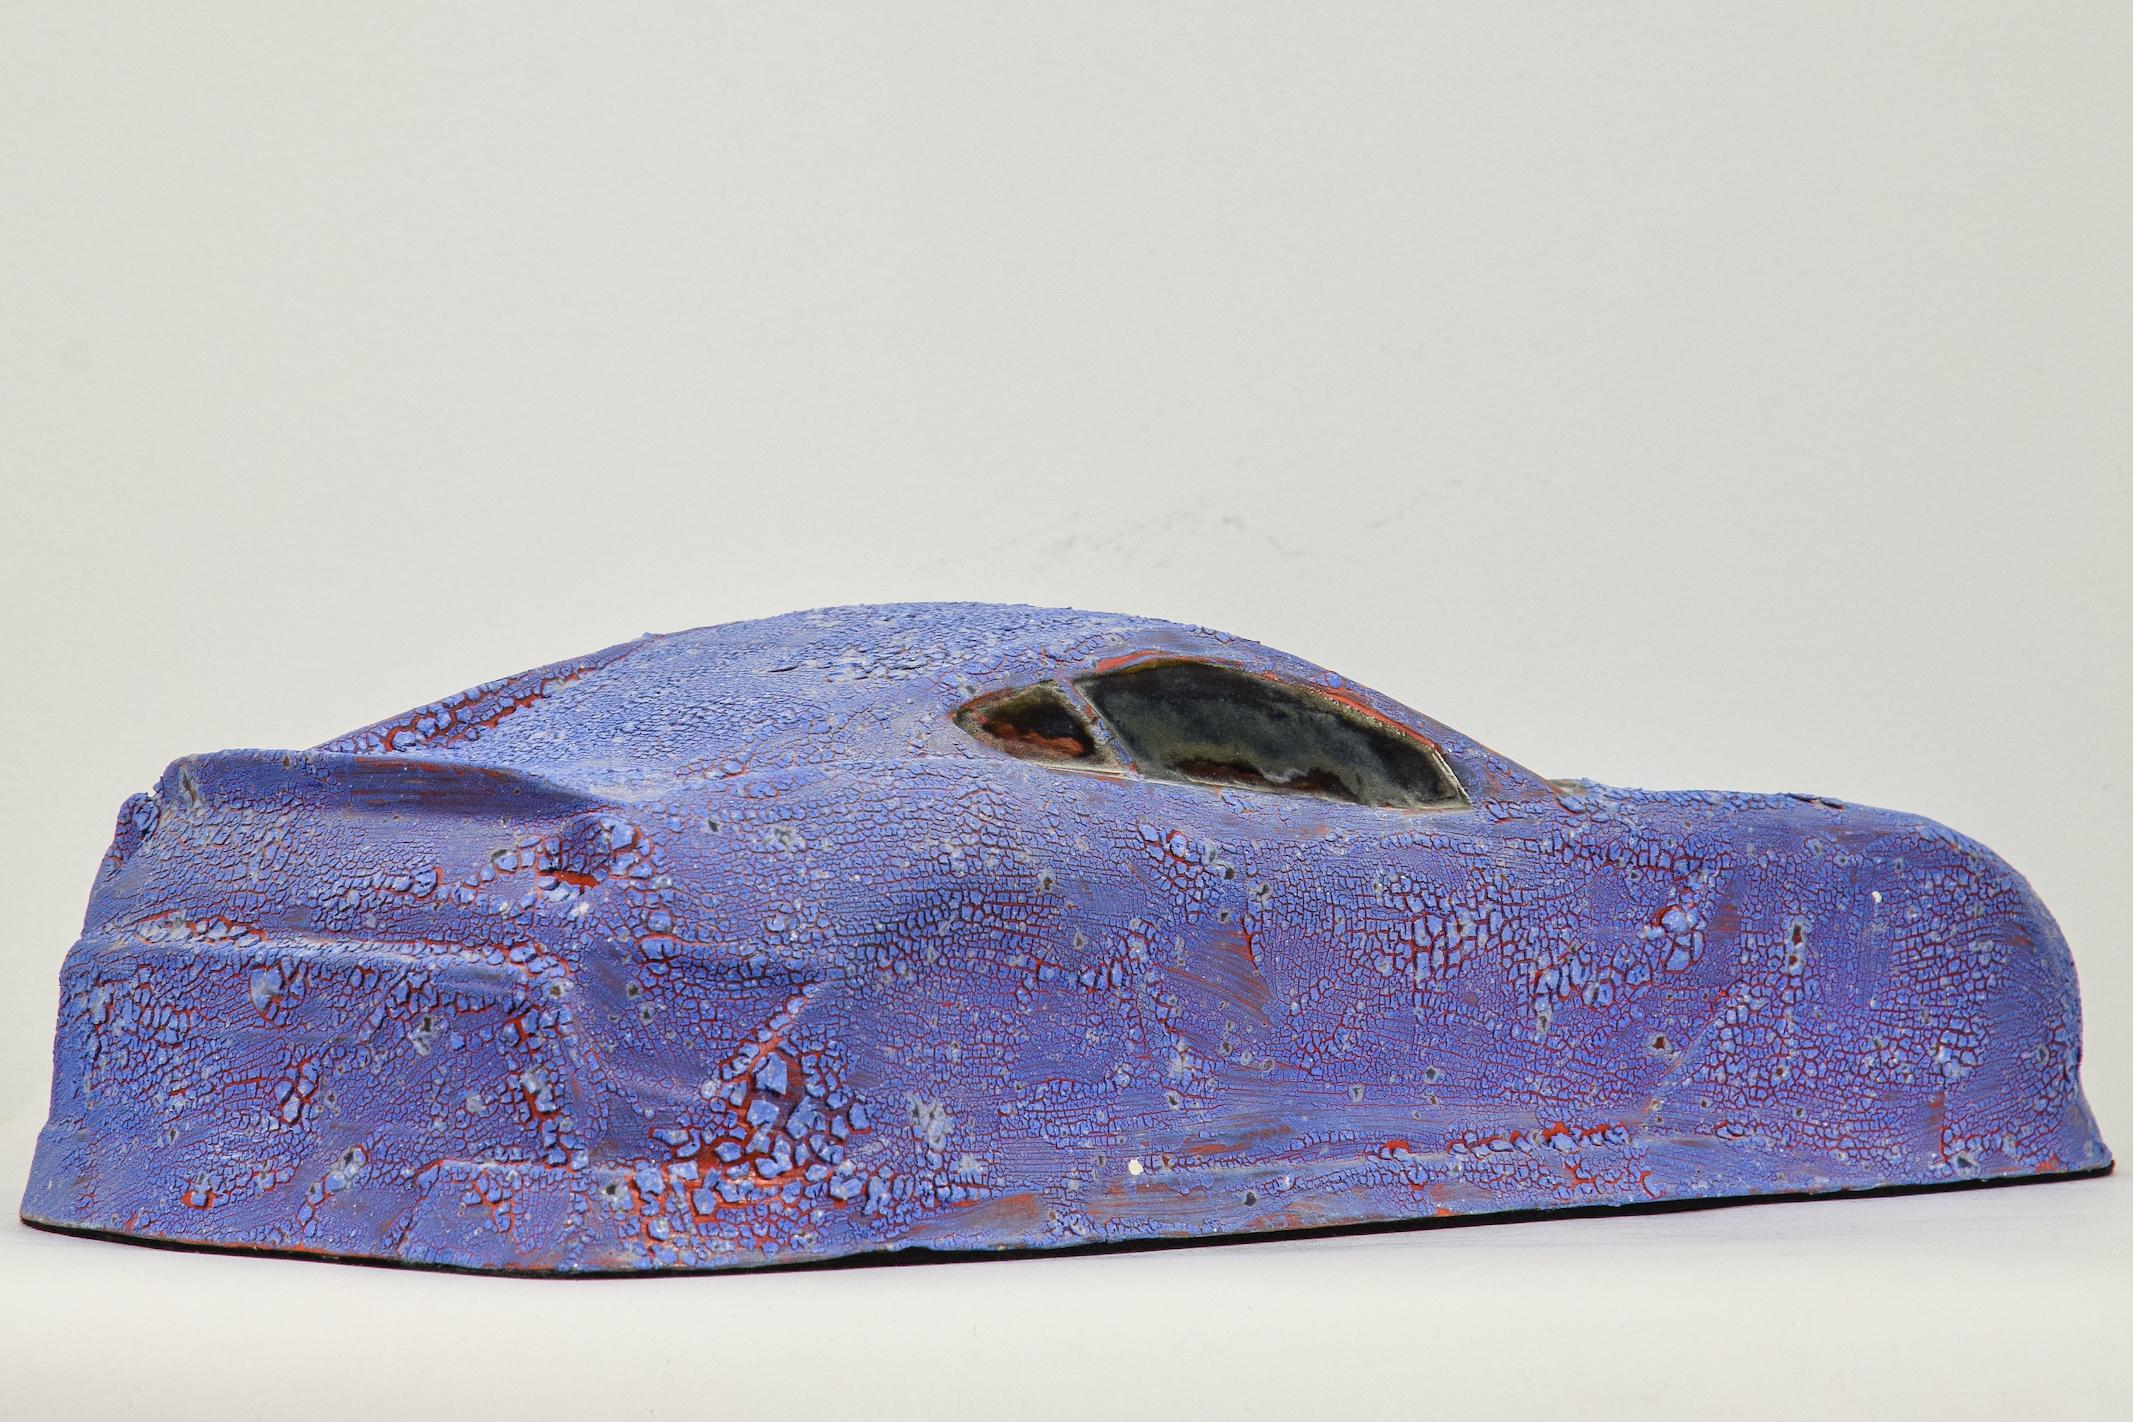 Crawl Not Wheels by Nam Tran (b. 1988 - )

Ceramic with crawl and metallic glaze
10.5 x 17.2 x 39.8 cm (4 ¹/₈ x 6 ³/₄ x 15 ⁵/₈ inches)
Initialled and numbered 1/1 on the base
Executed in 2019

Provenance 
Studio of the Artist, London

This work is